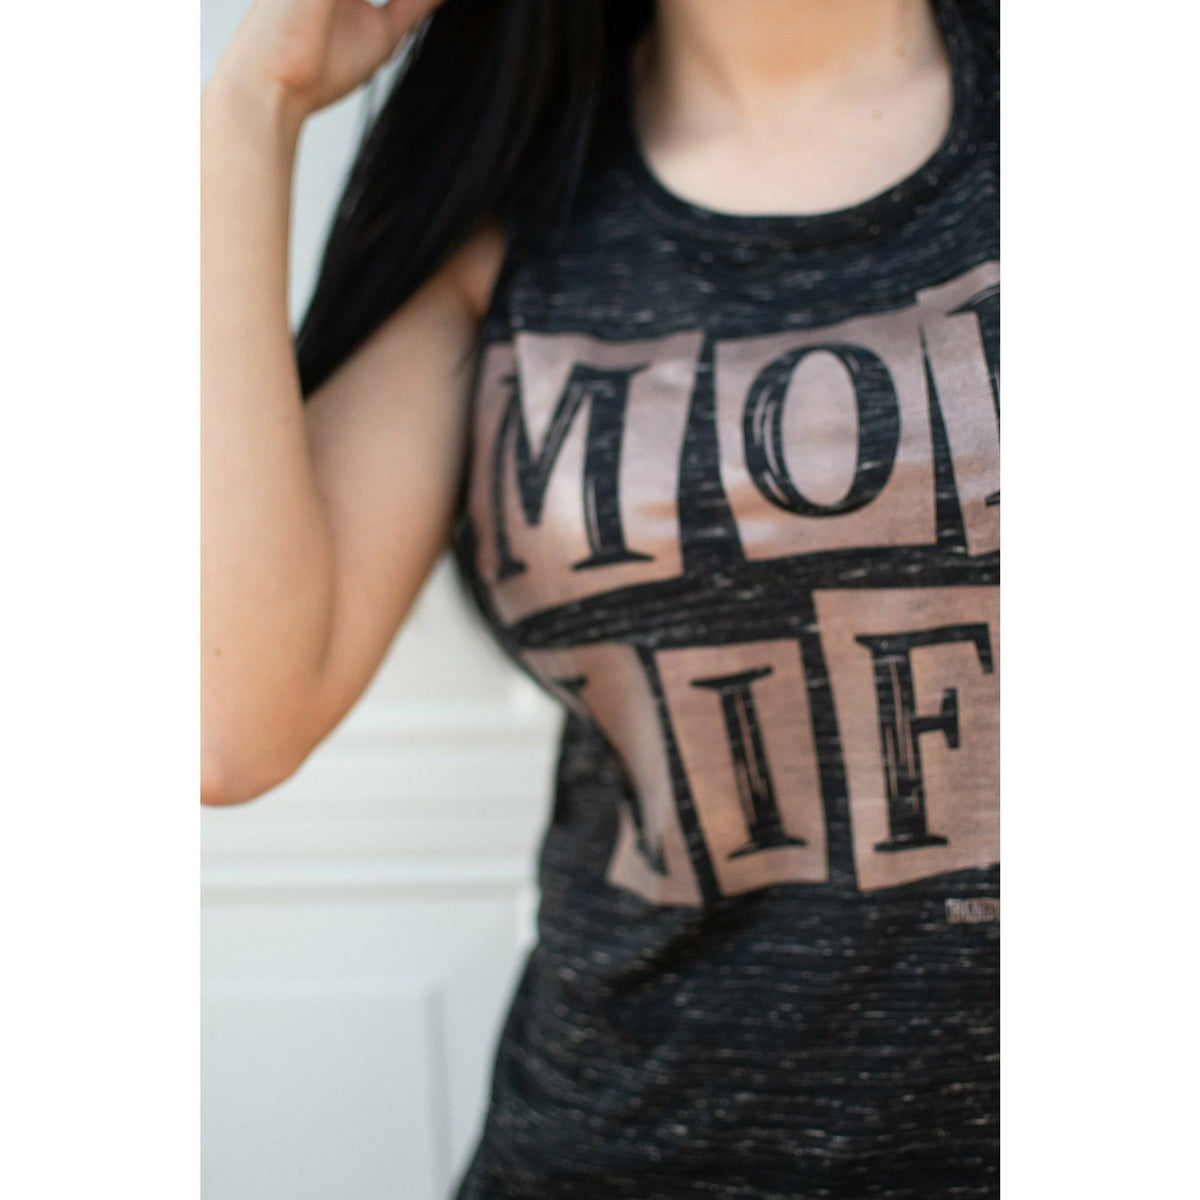 Rose gold Mom life Muscle tank (more colors)